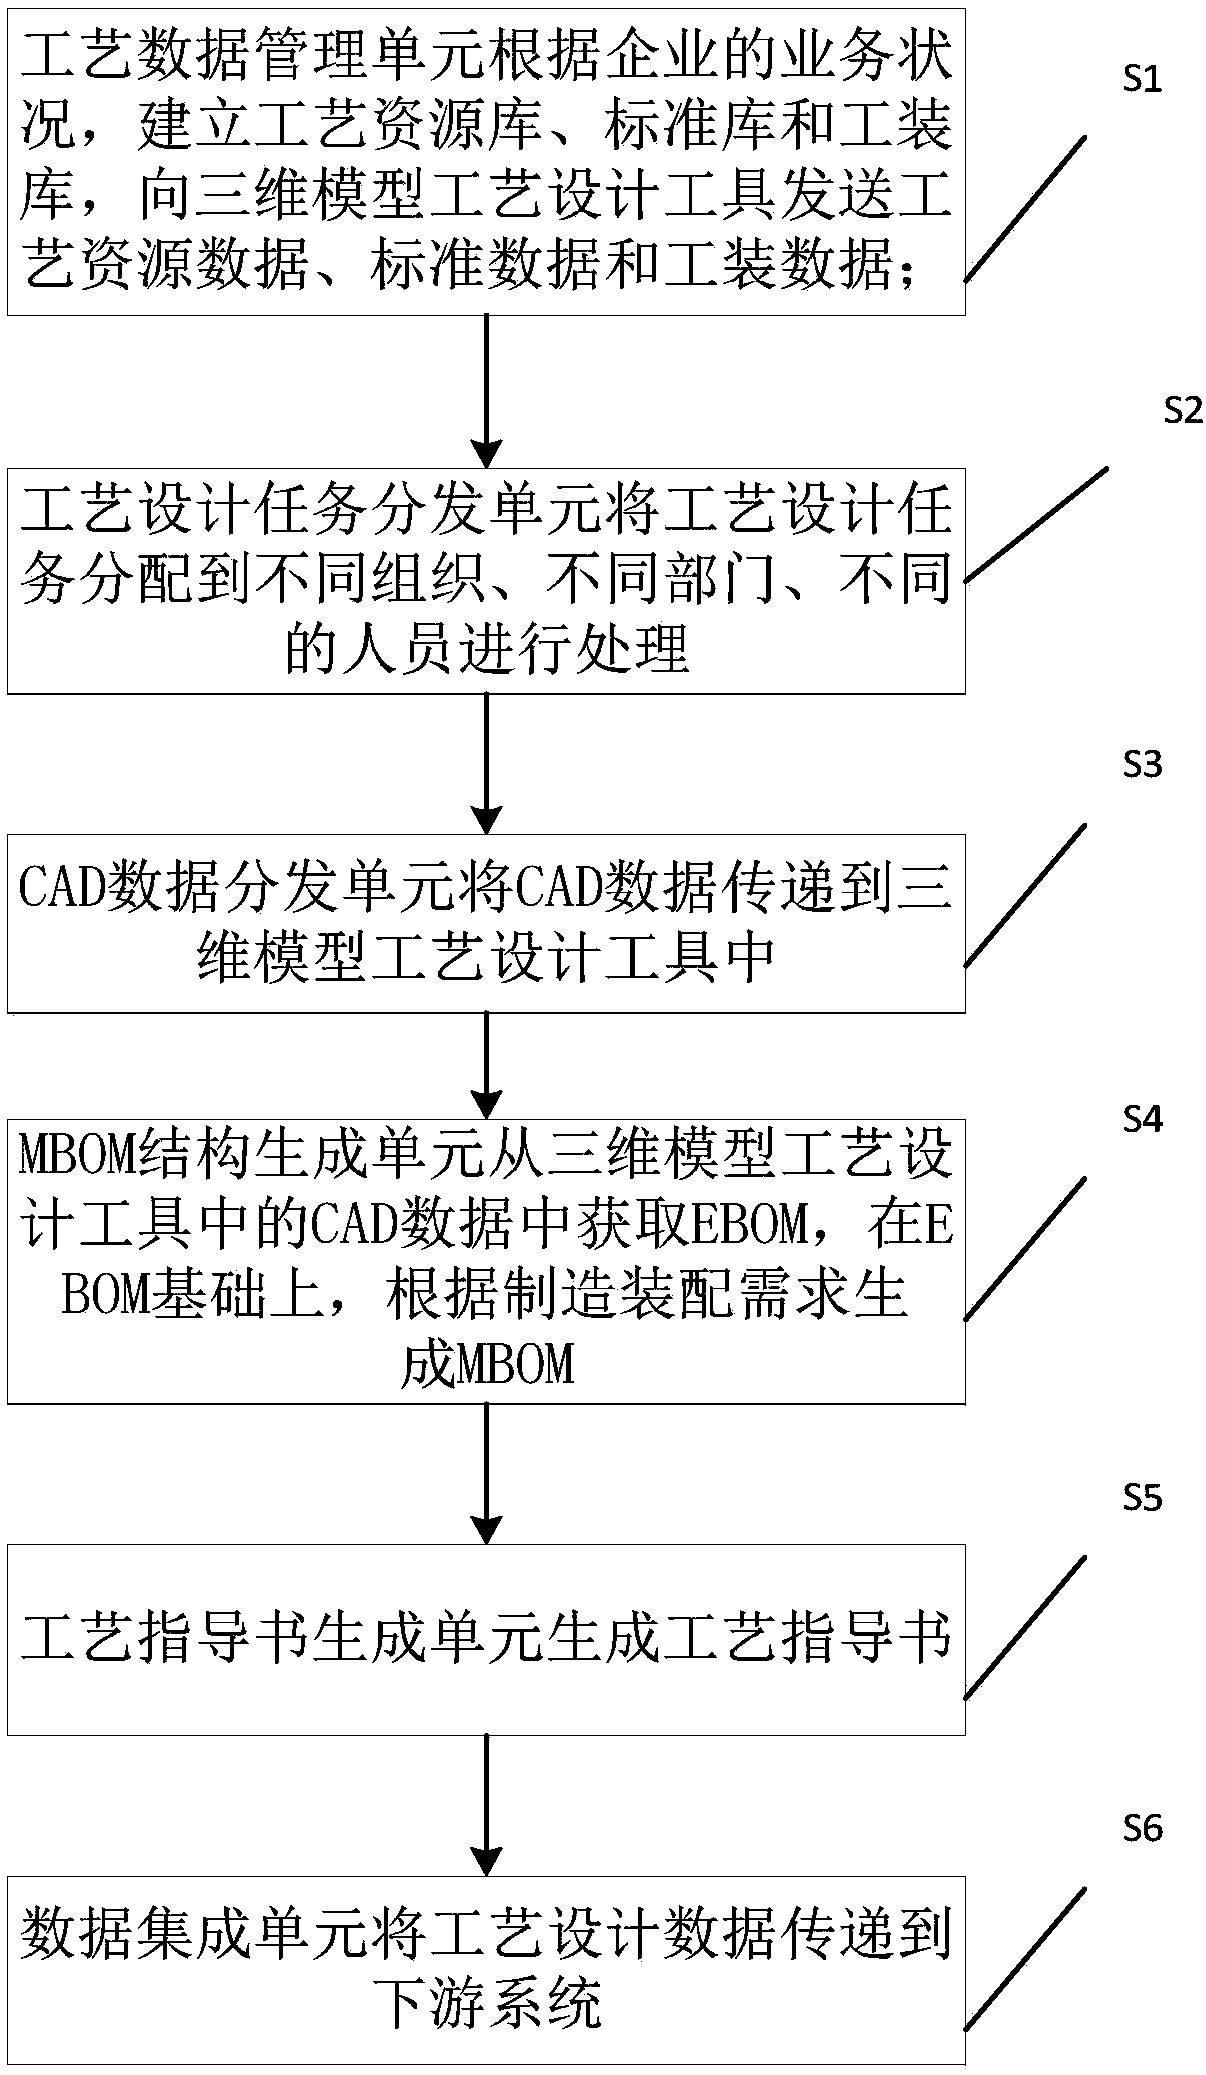 Process design collaboration management system and method based on three-dimensional model